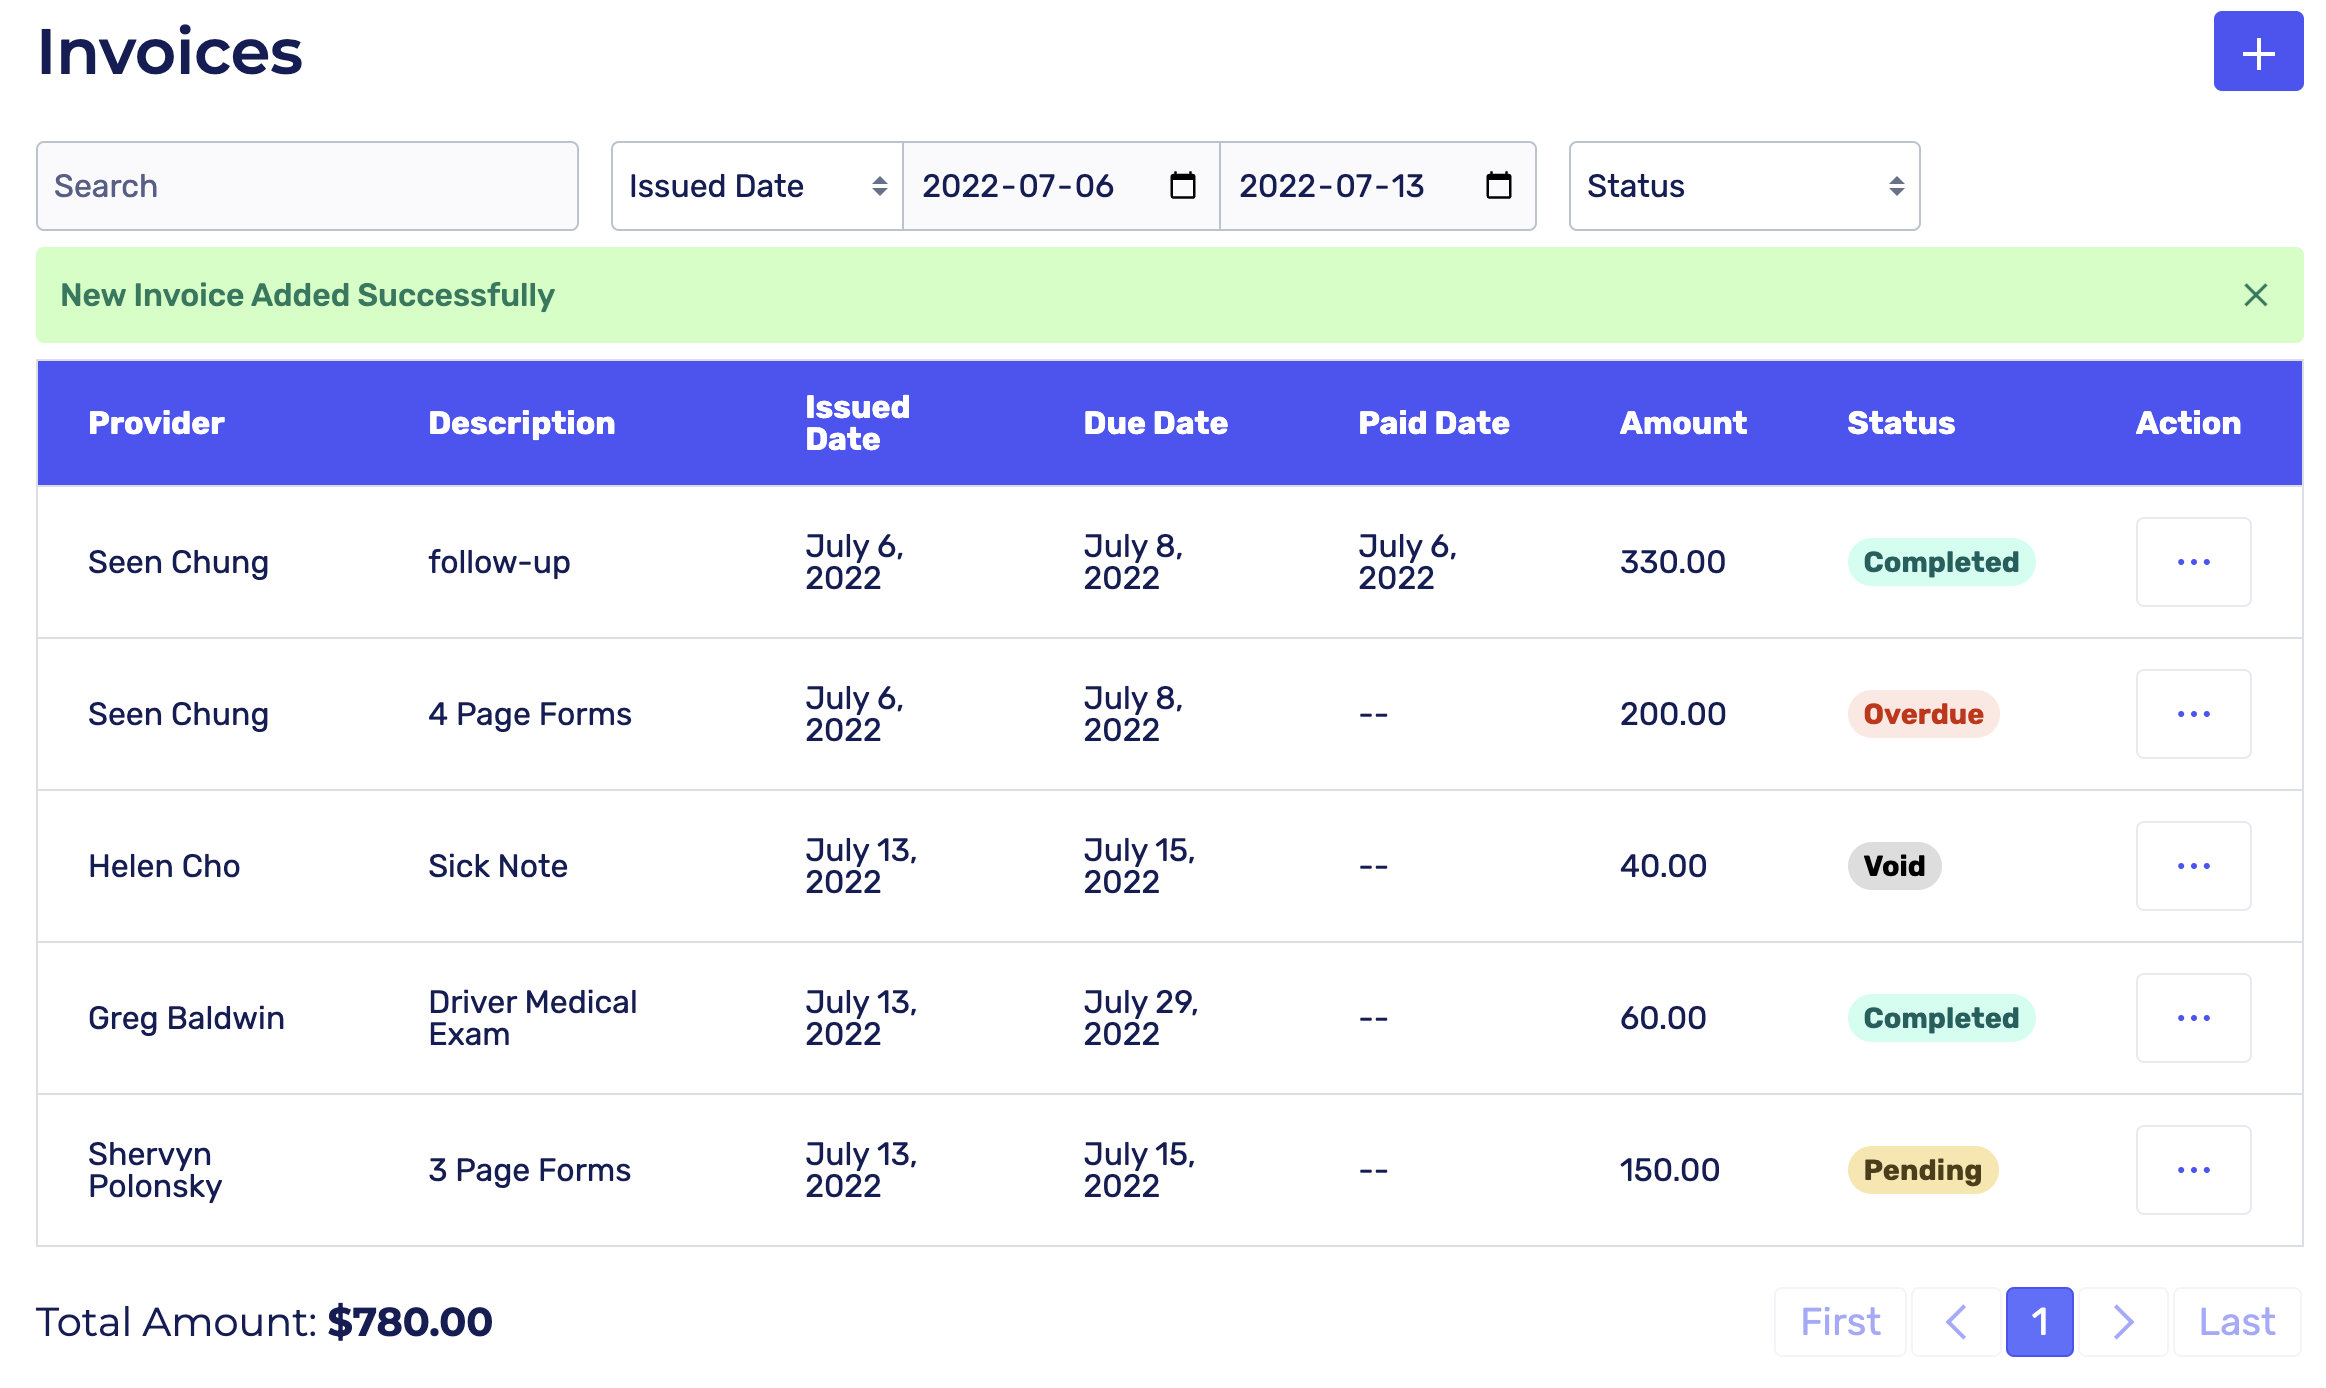 View invoice history with EMR plug in